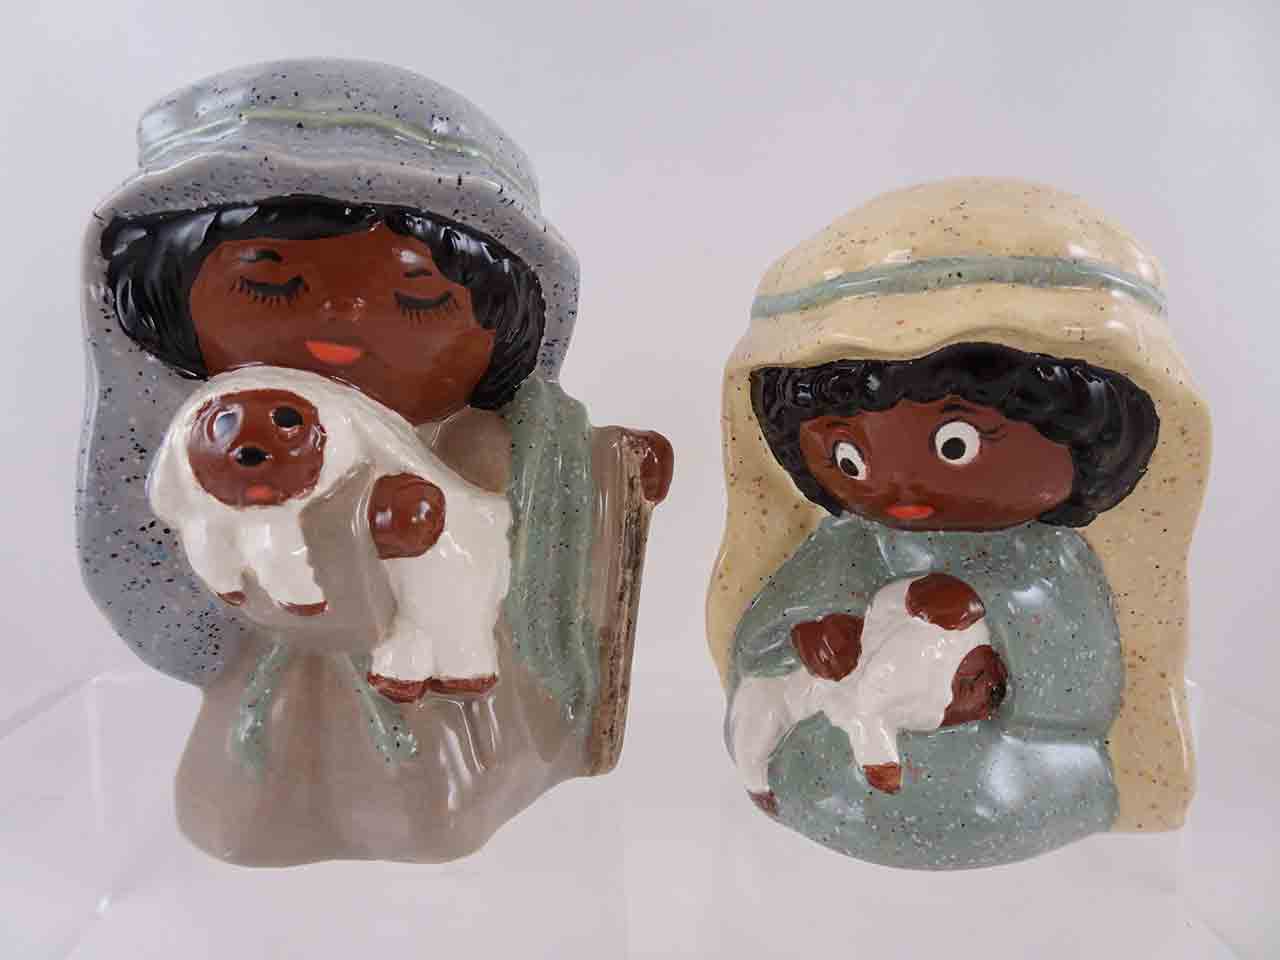 Jean Grief nativity scene series of salt and pepper shakers - Shepards